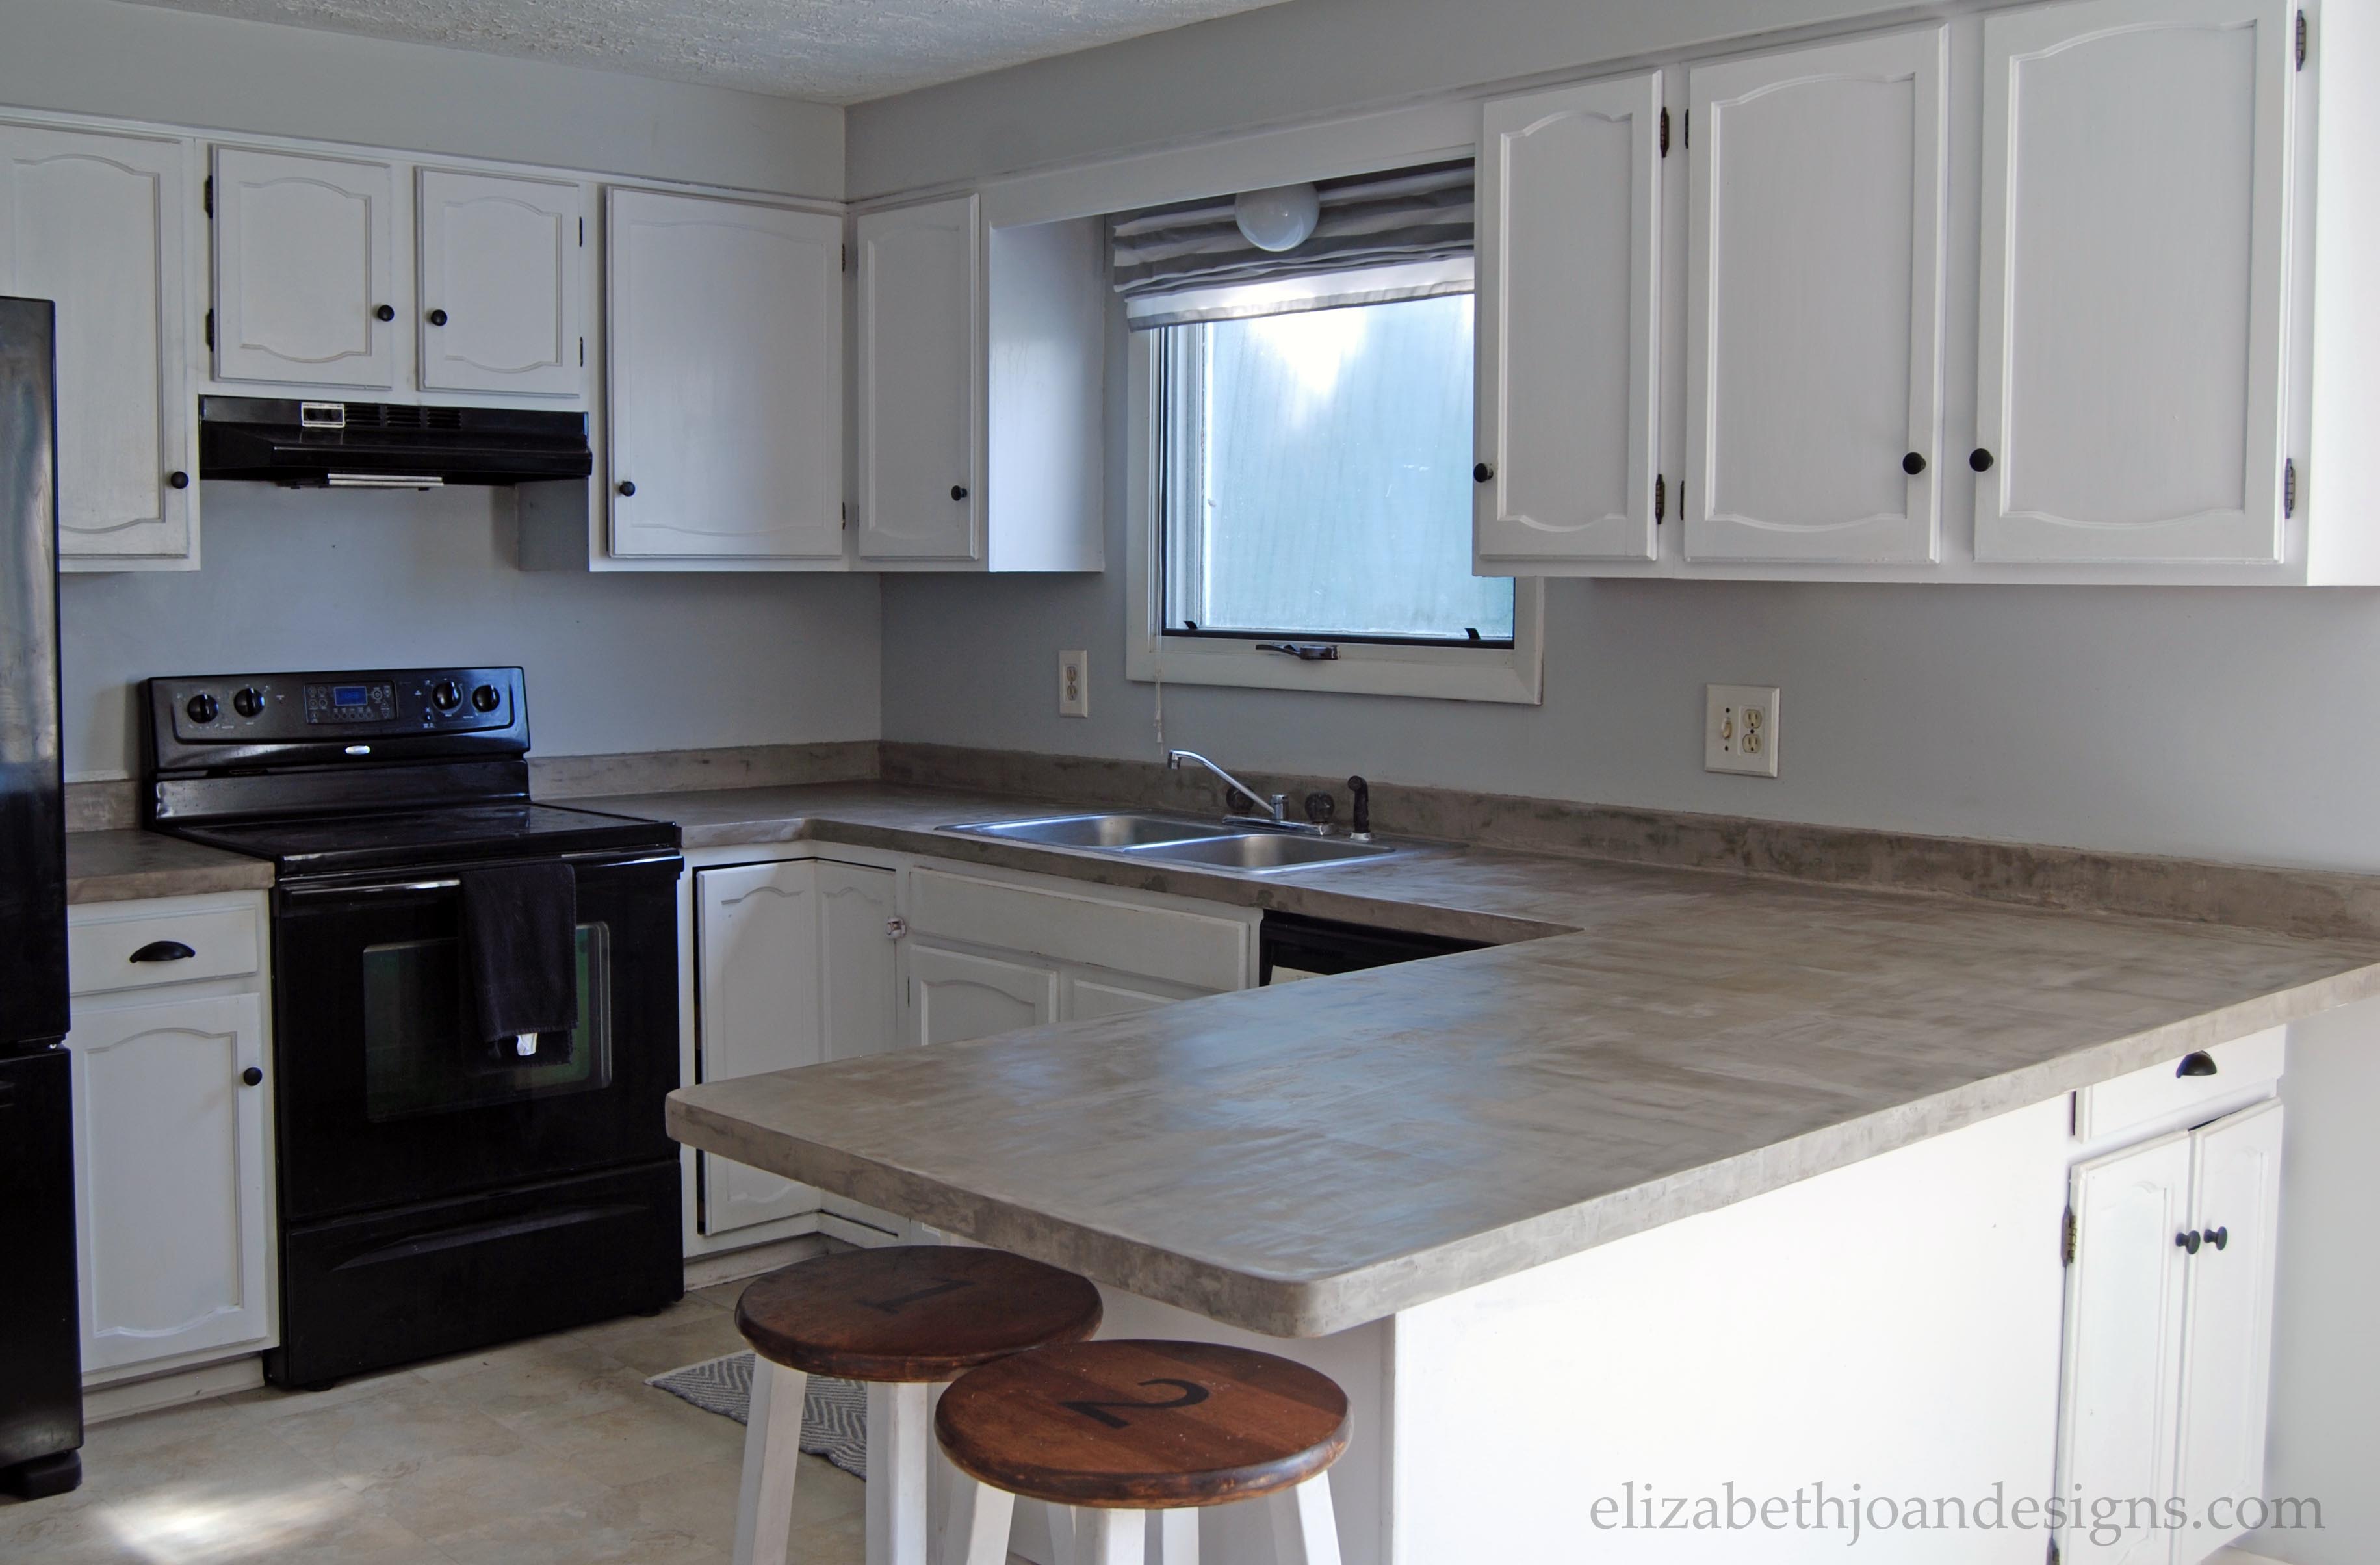 Our Experience With Ardex Concrete Counters Elizabeth Joan Designs